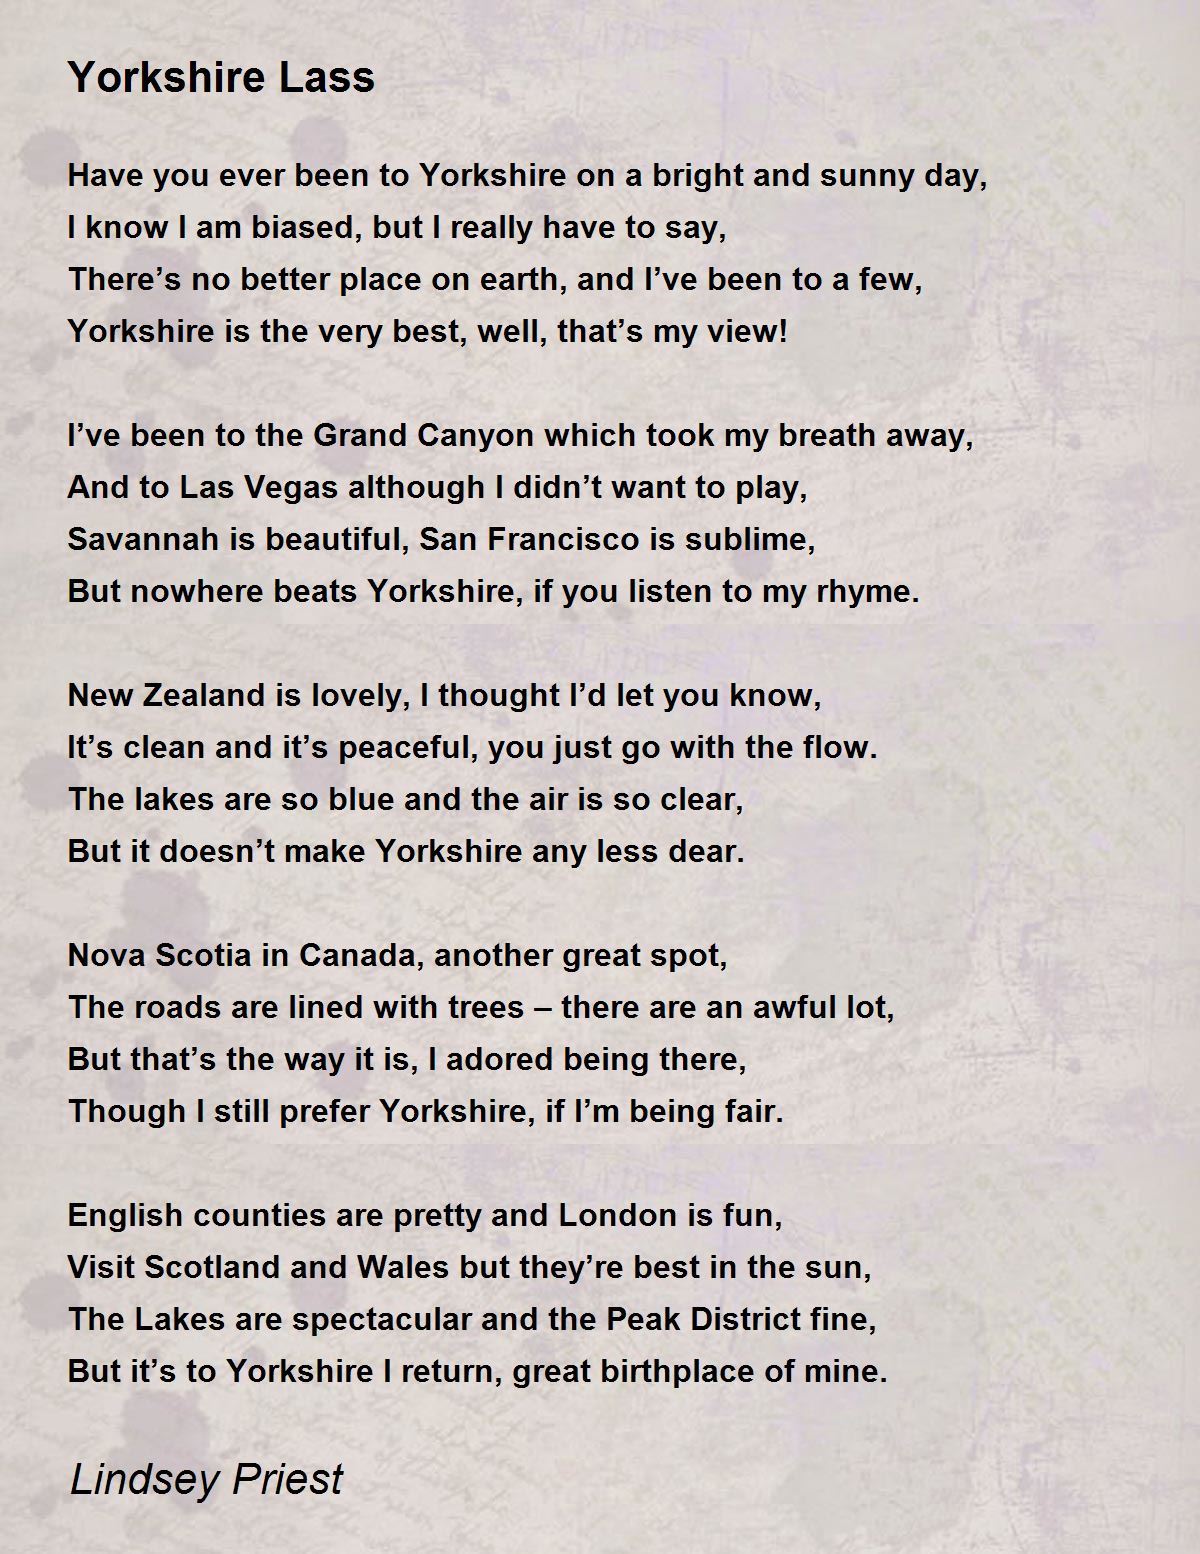 yorkshire-lass-yorkshire-lass-poem-by-lindsey-priest